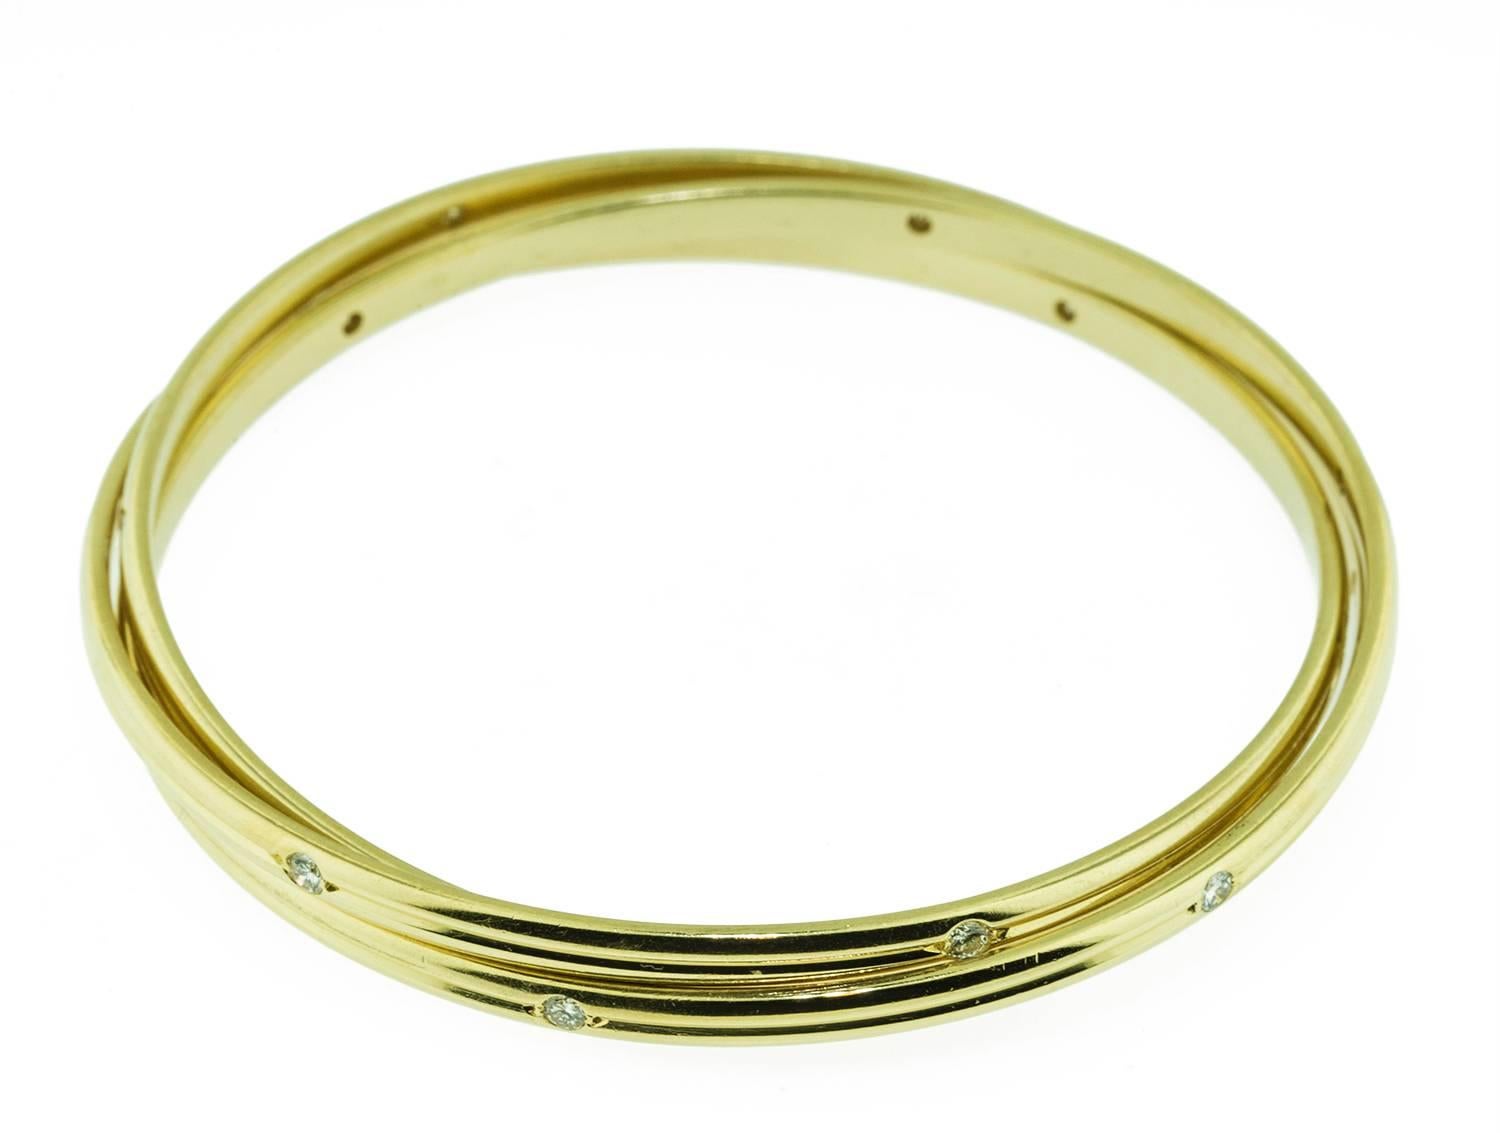 This bracelet is 18k yellow gold and stamped Cartier. It bares the registration mark B 4121. The ribbed yellow gold bangles hold eighteen high quality diamonds totaling 1 ct. The bangles were made in France approximately twenty five years ago. They